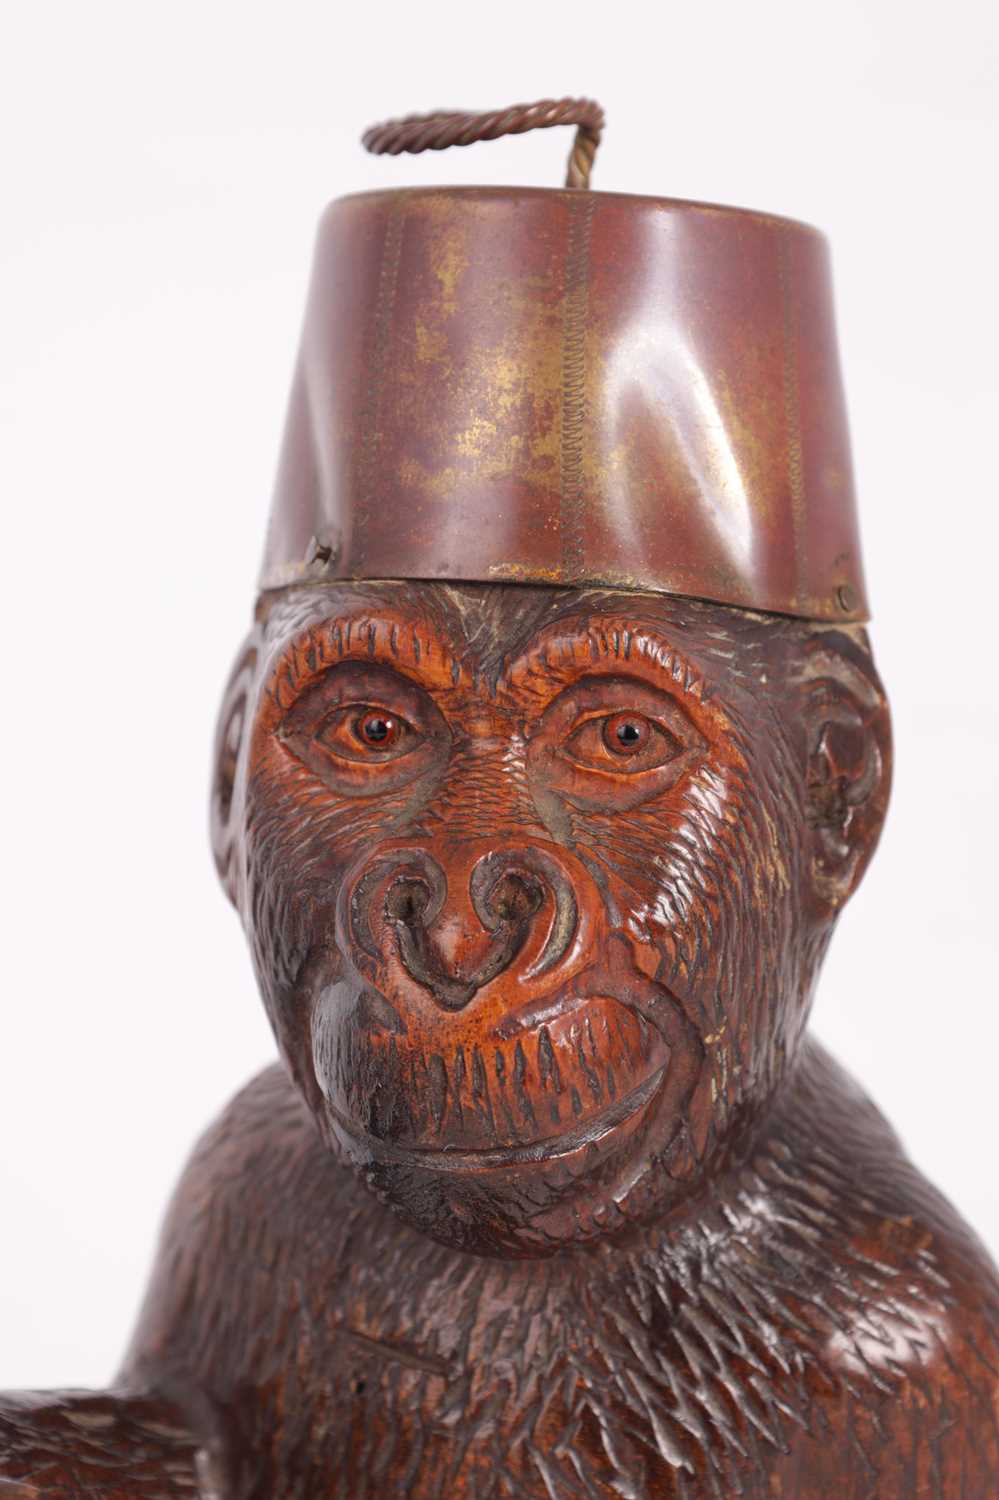 A 19TH CENTURY BLACK FOREST CARVED MONKEY - Image 3 of 7